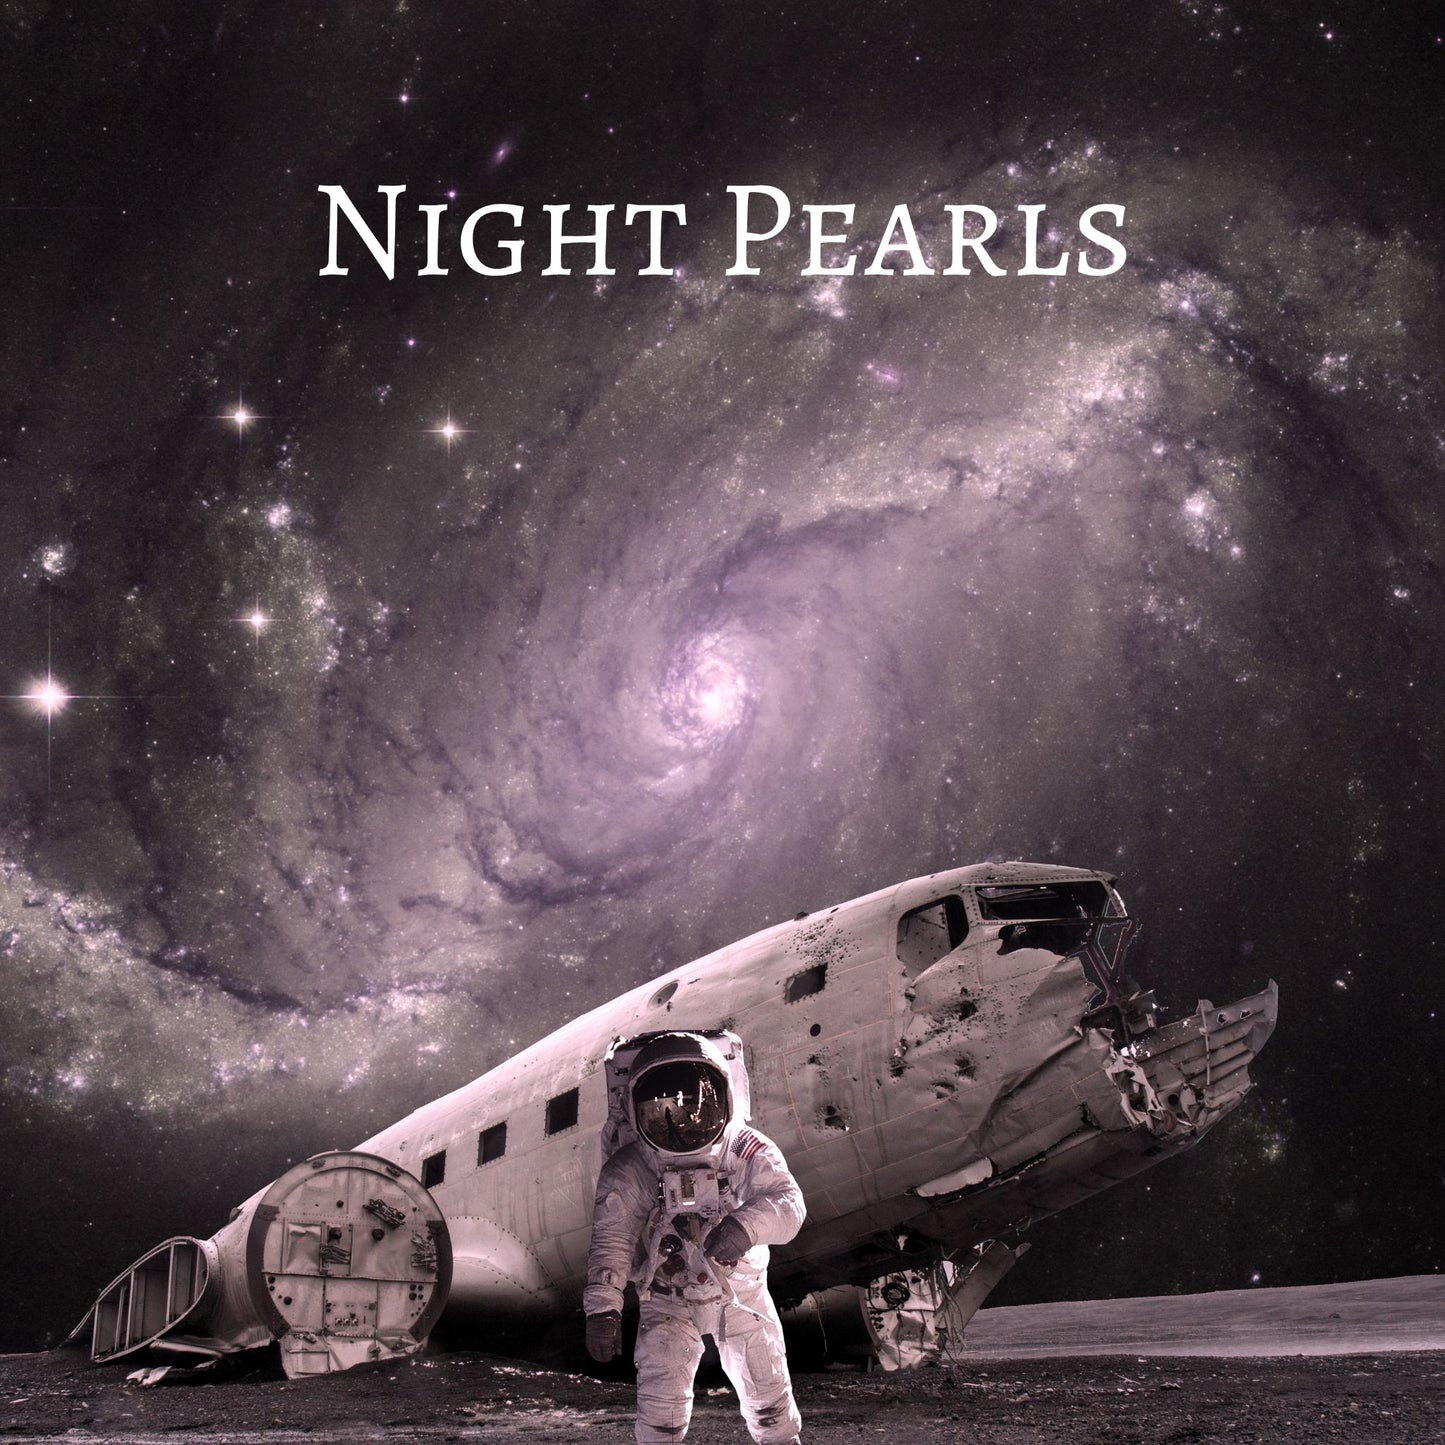 CD Cover of song Night Pearls